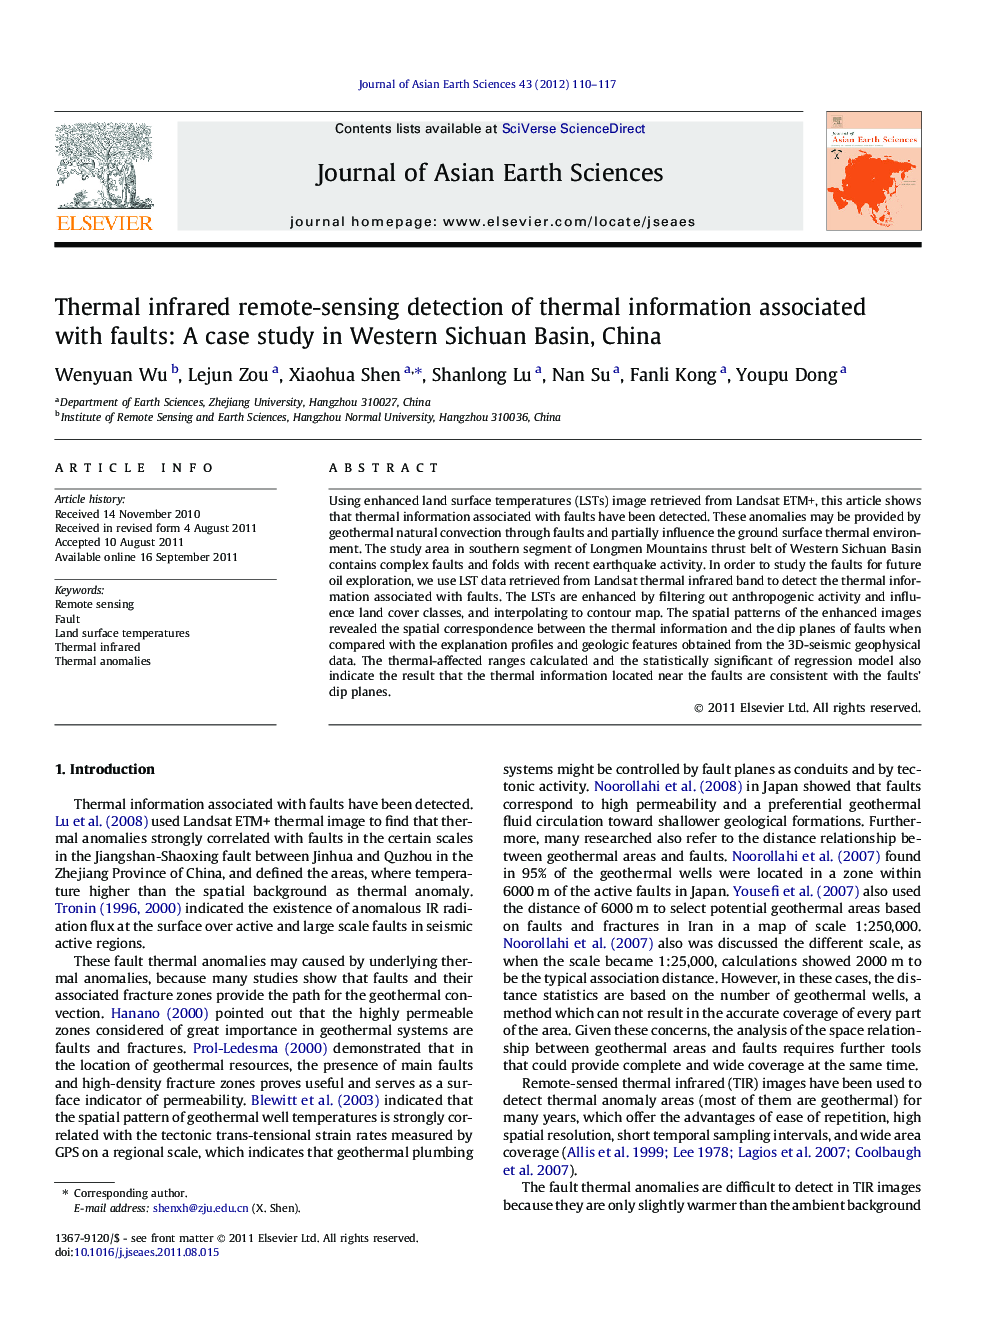 Thermal infrared remote-sensing detection of thermal information associated with faults: A case study in Western Sichuan Basin, China